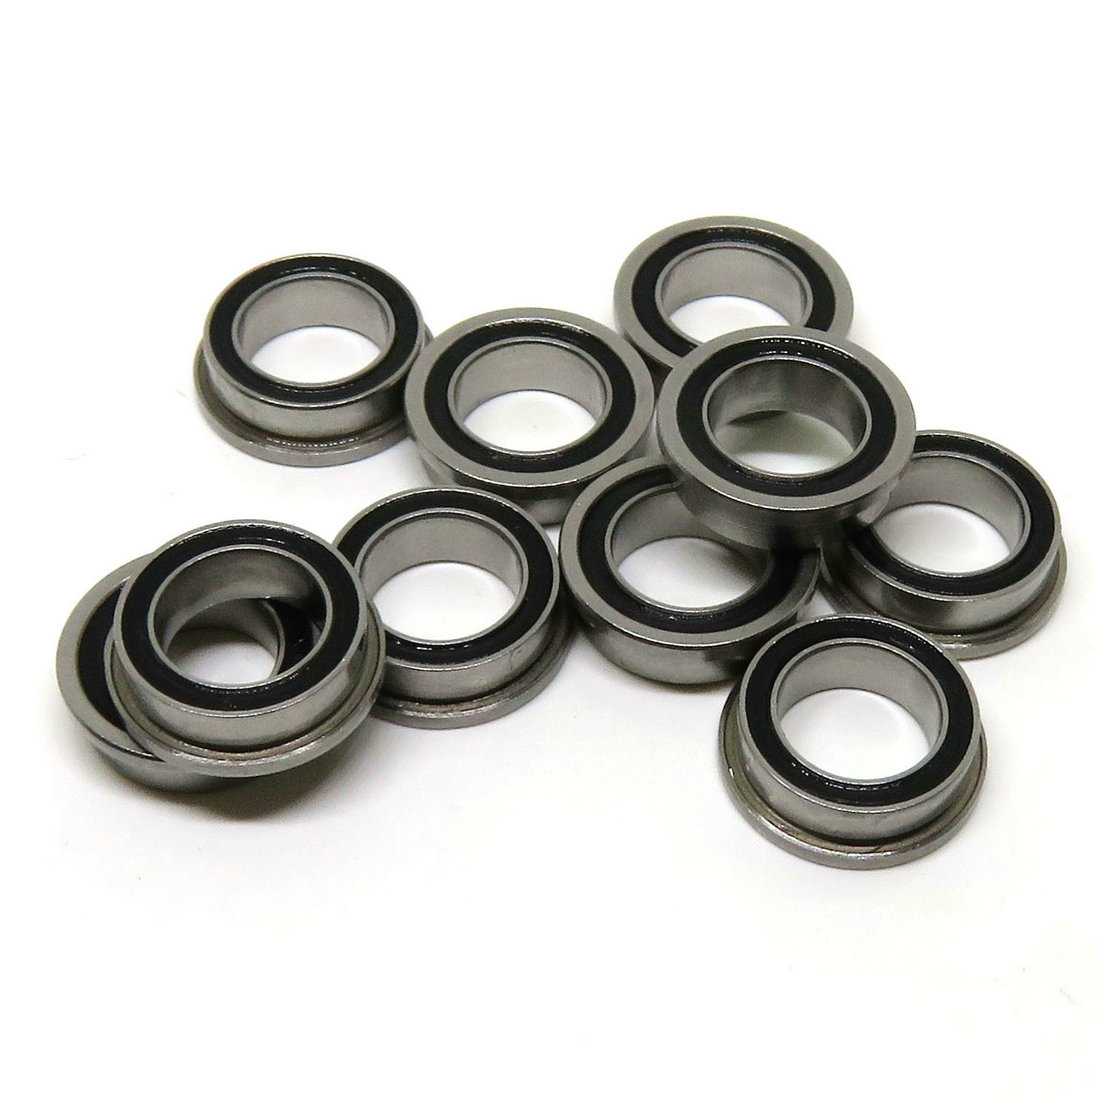 Rubber Sealed Stainless Steel Flanged Bearing SMF52 SMF62 SMF2 SMF63 SMF83 SMF93 SMF74 SMF84 SMF104 SMF85 SMF95 SMF105 SMF115 SMF106 SMF117 SMF128 SMF148-2RS.jpg